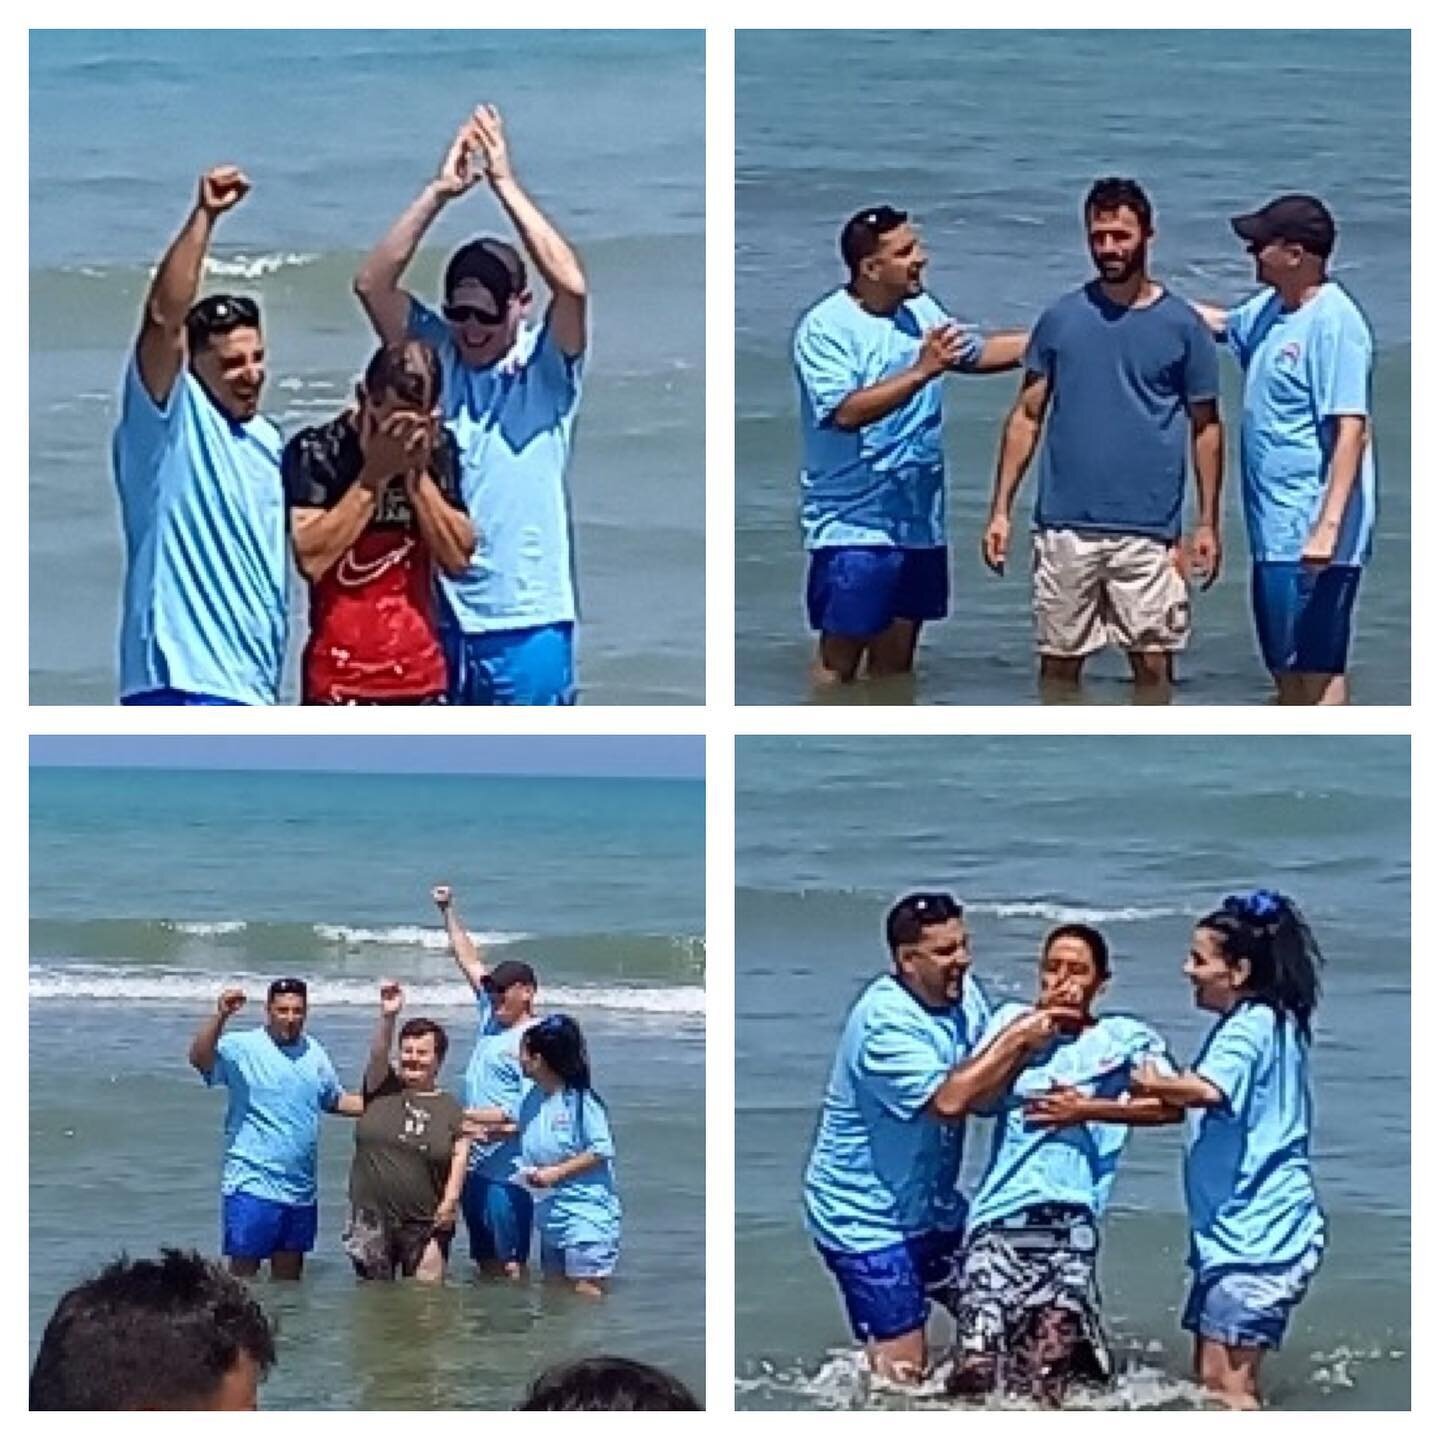 Yesterday was a great day for our community. Around 120 of us celebrating life and faith together. Some visiting the beach for the very first time. A wonderful finale to our week of &lsquo;Stepping Out&rsquo; #praisegod #steppingout #wearetekura